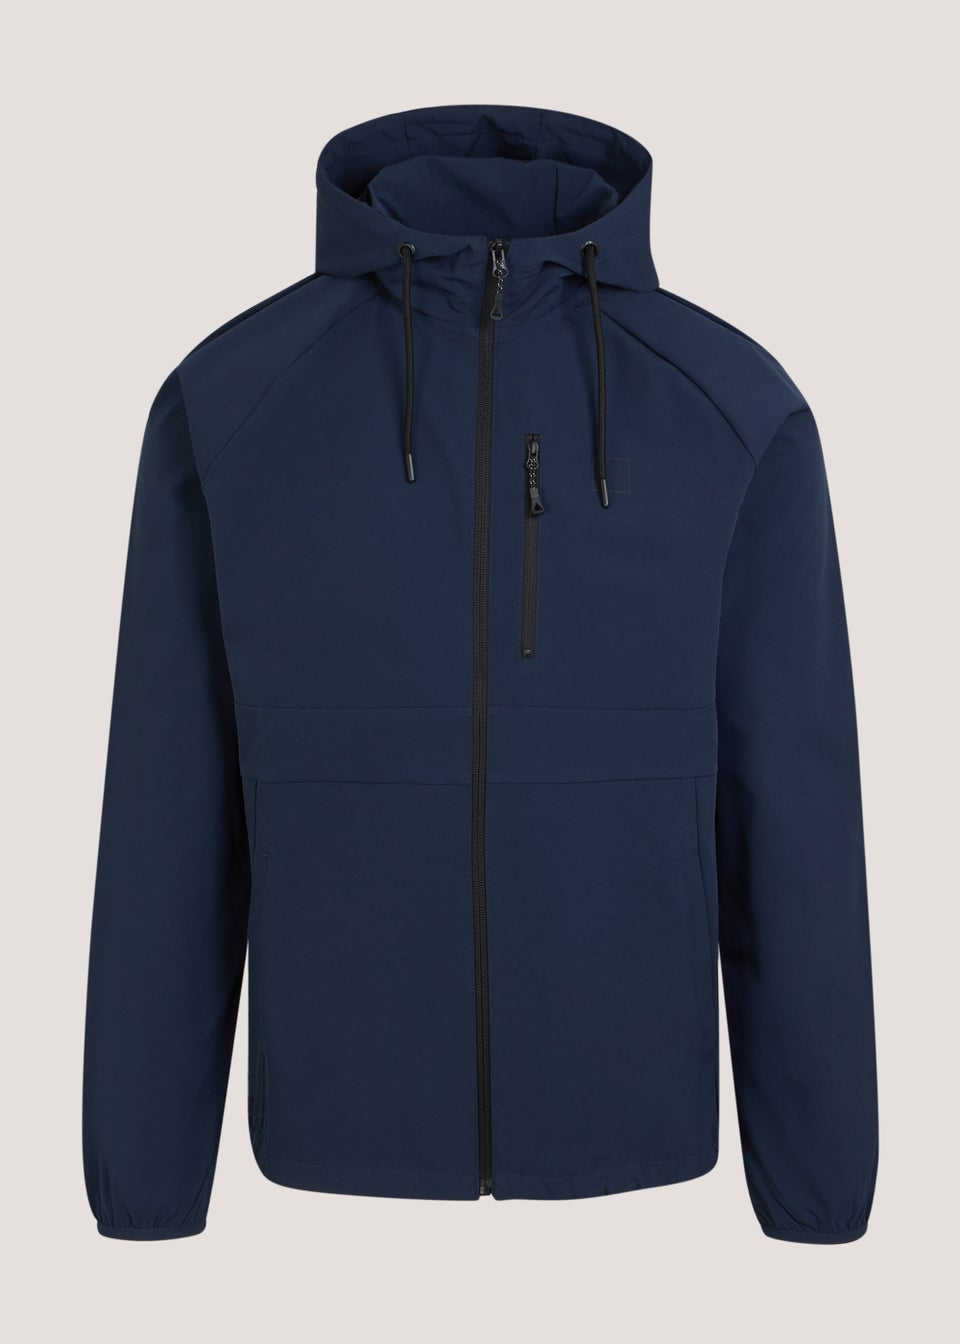 US Athletic Navy Woven Zip Up Jacket